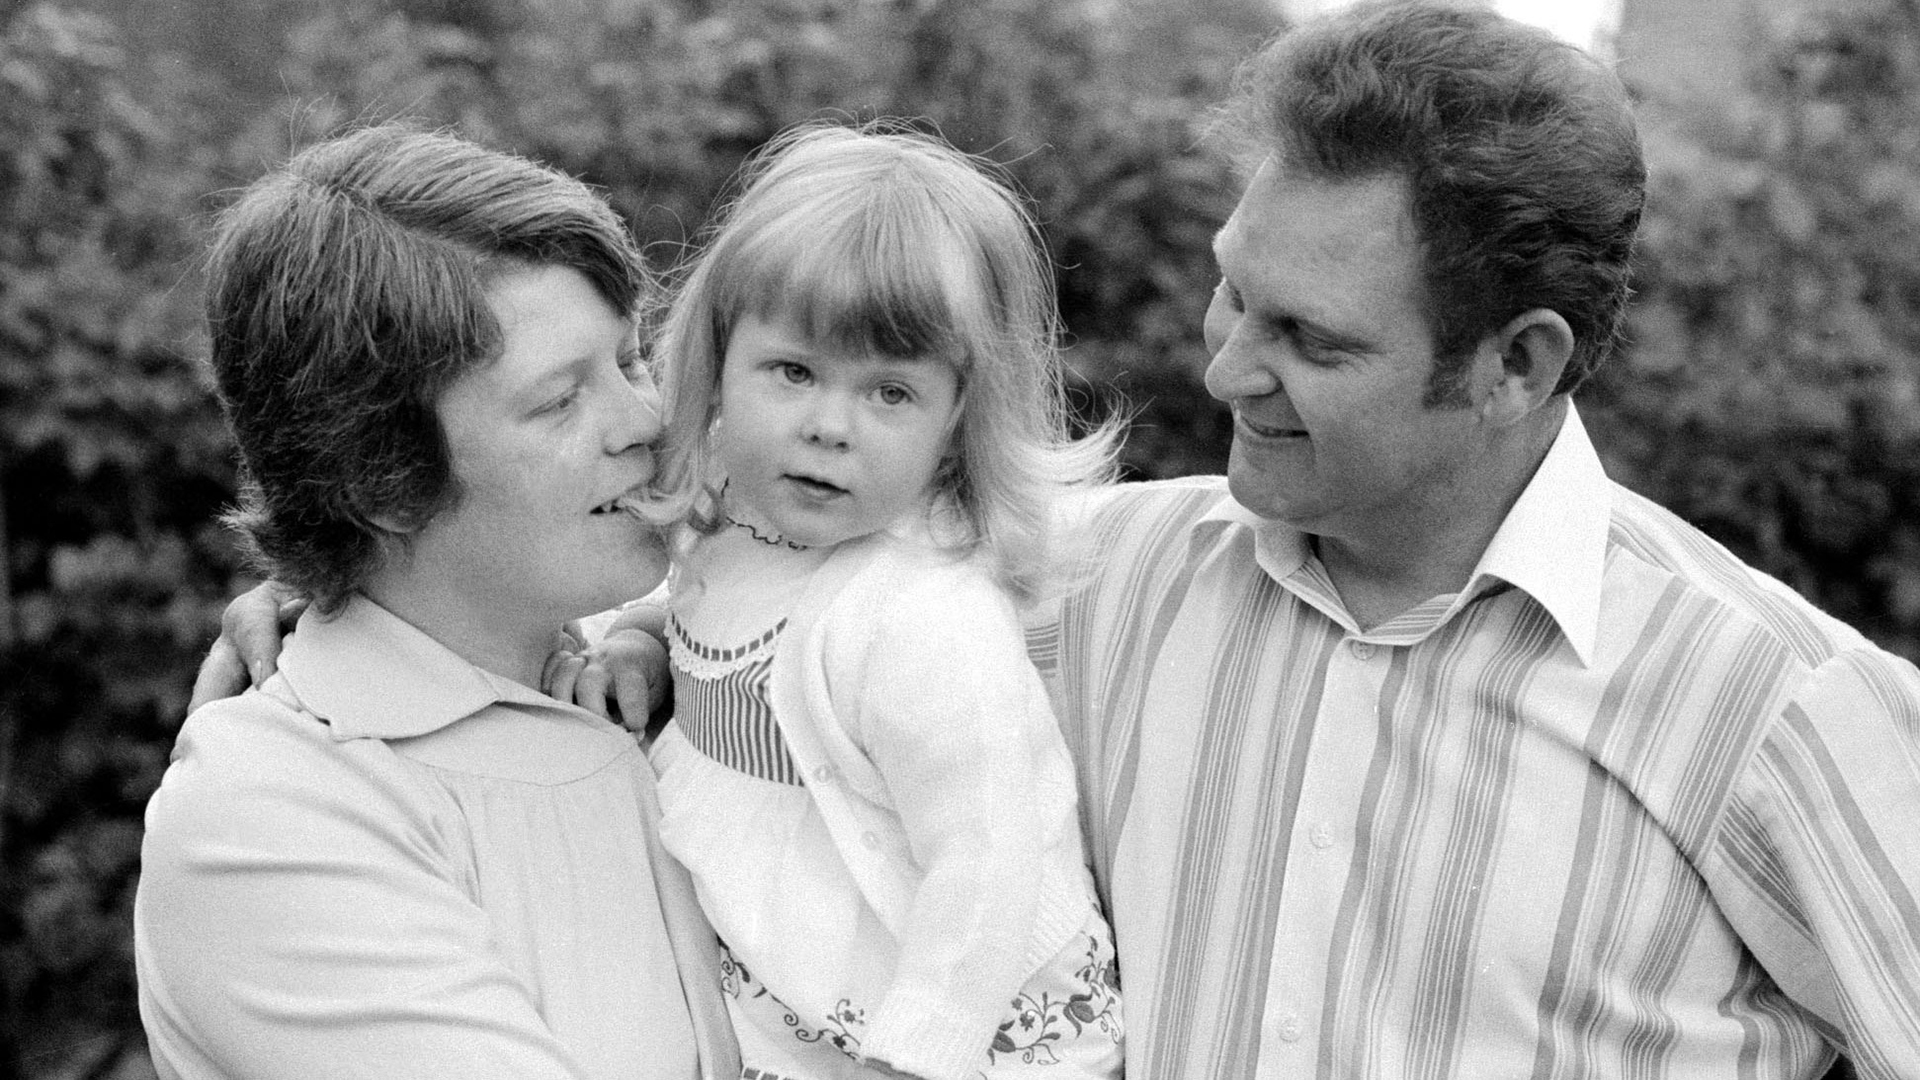 July 25, 1978: Louise Brown, the World's First Test Tube Baby, Was Born